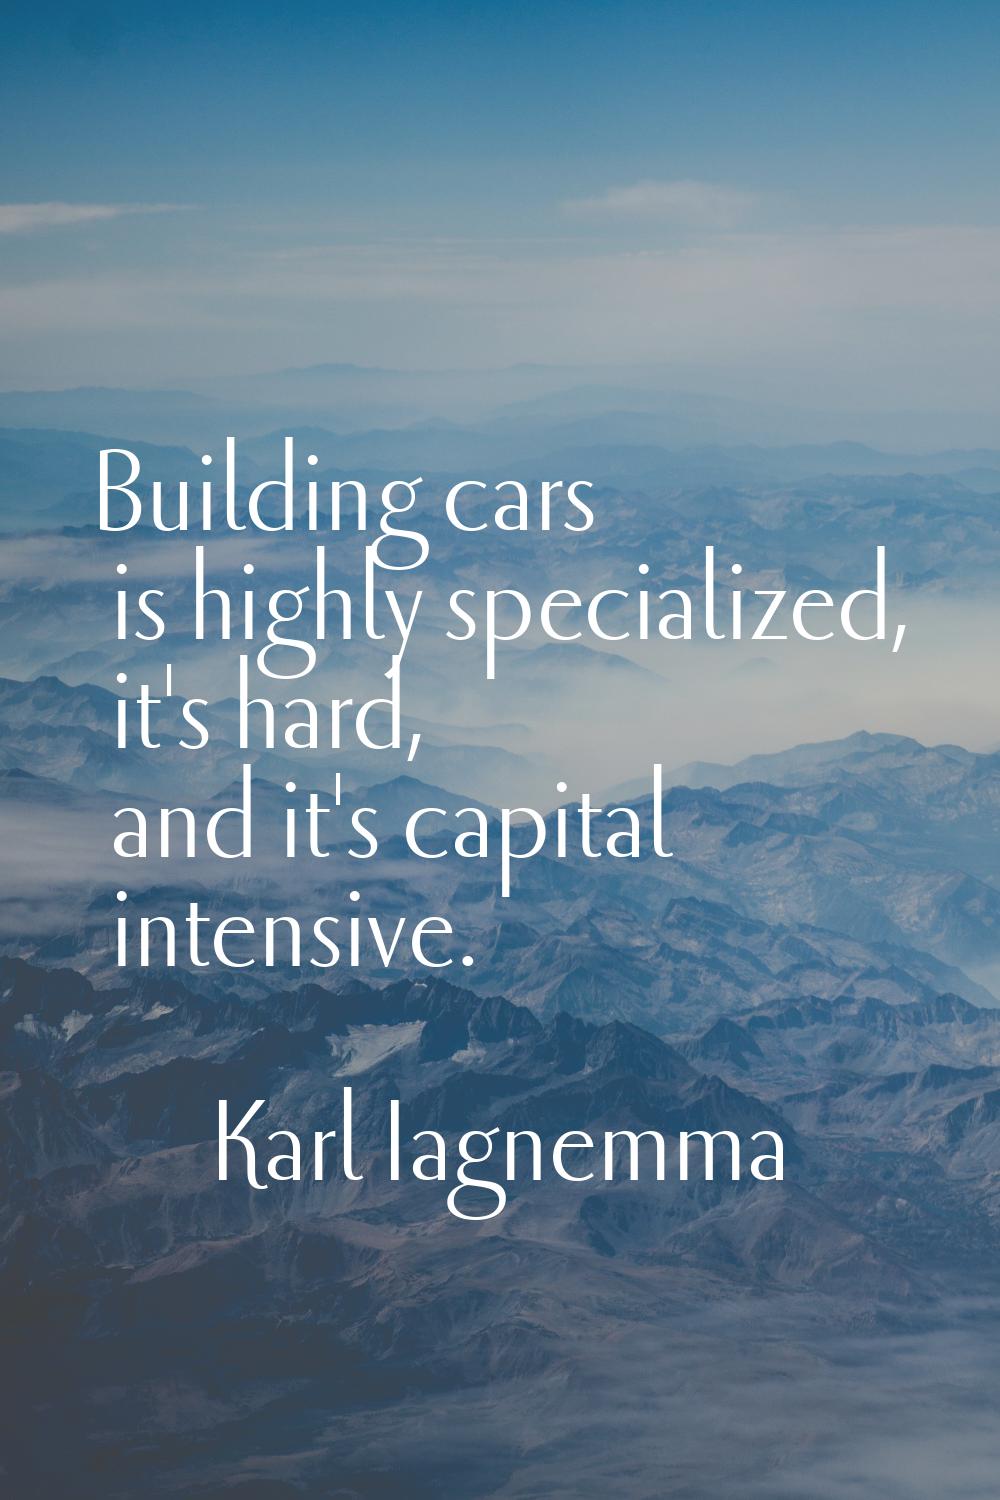 Building cars is highly specialized, it's hard, and it's capital intensive.